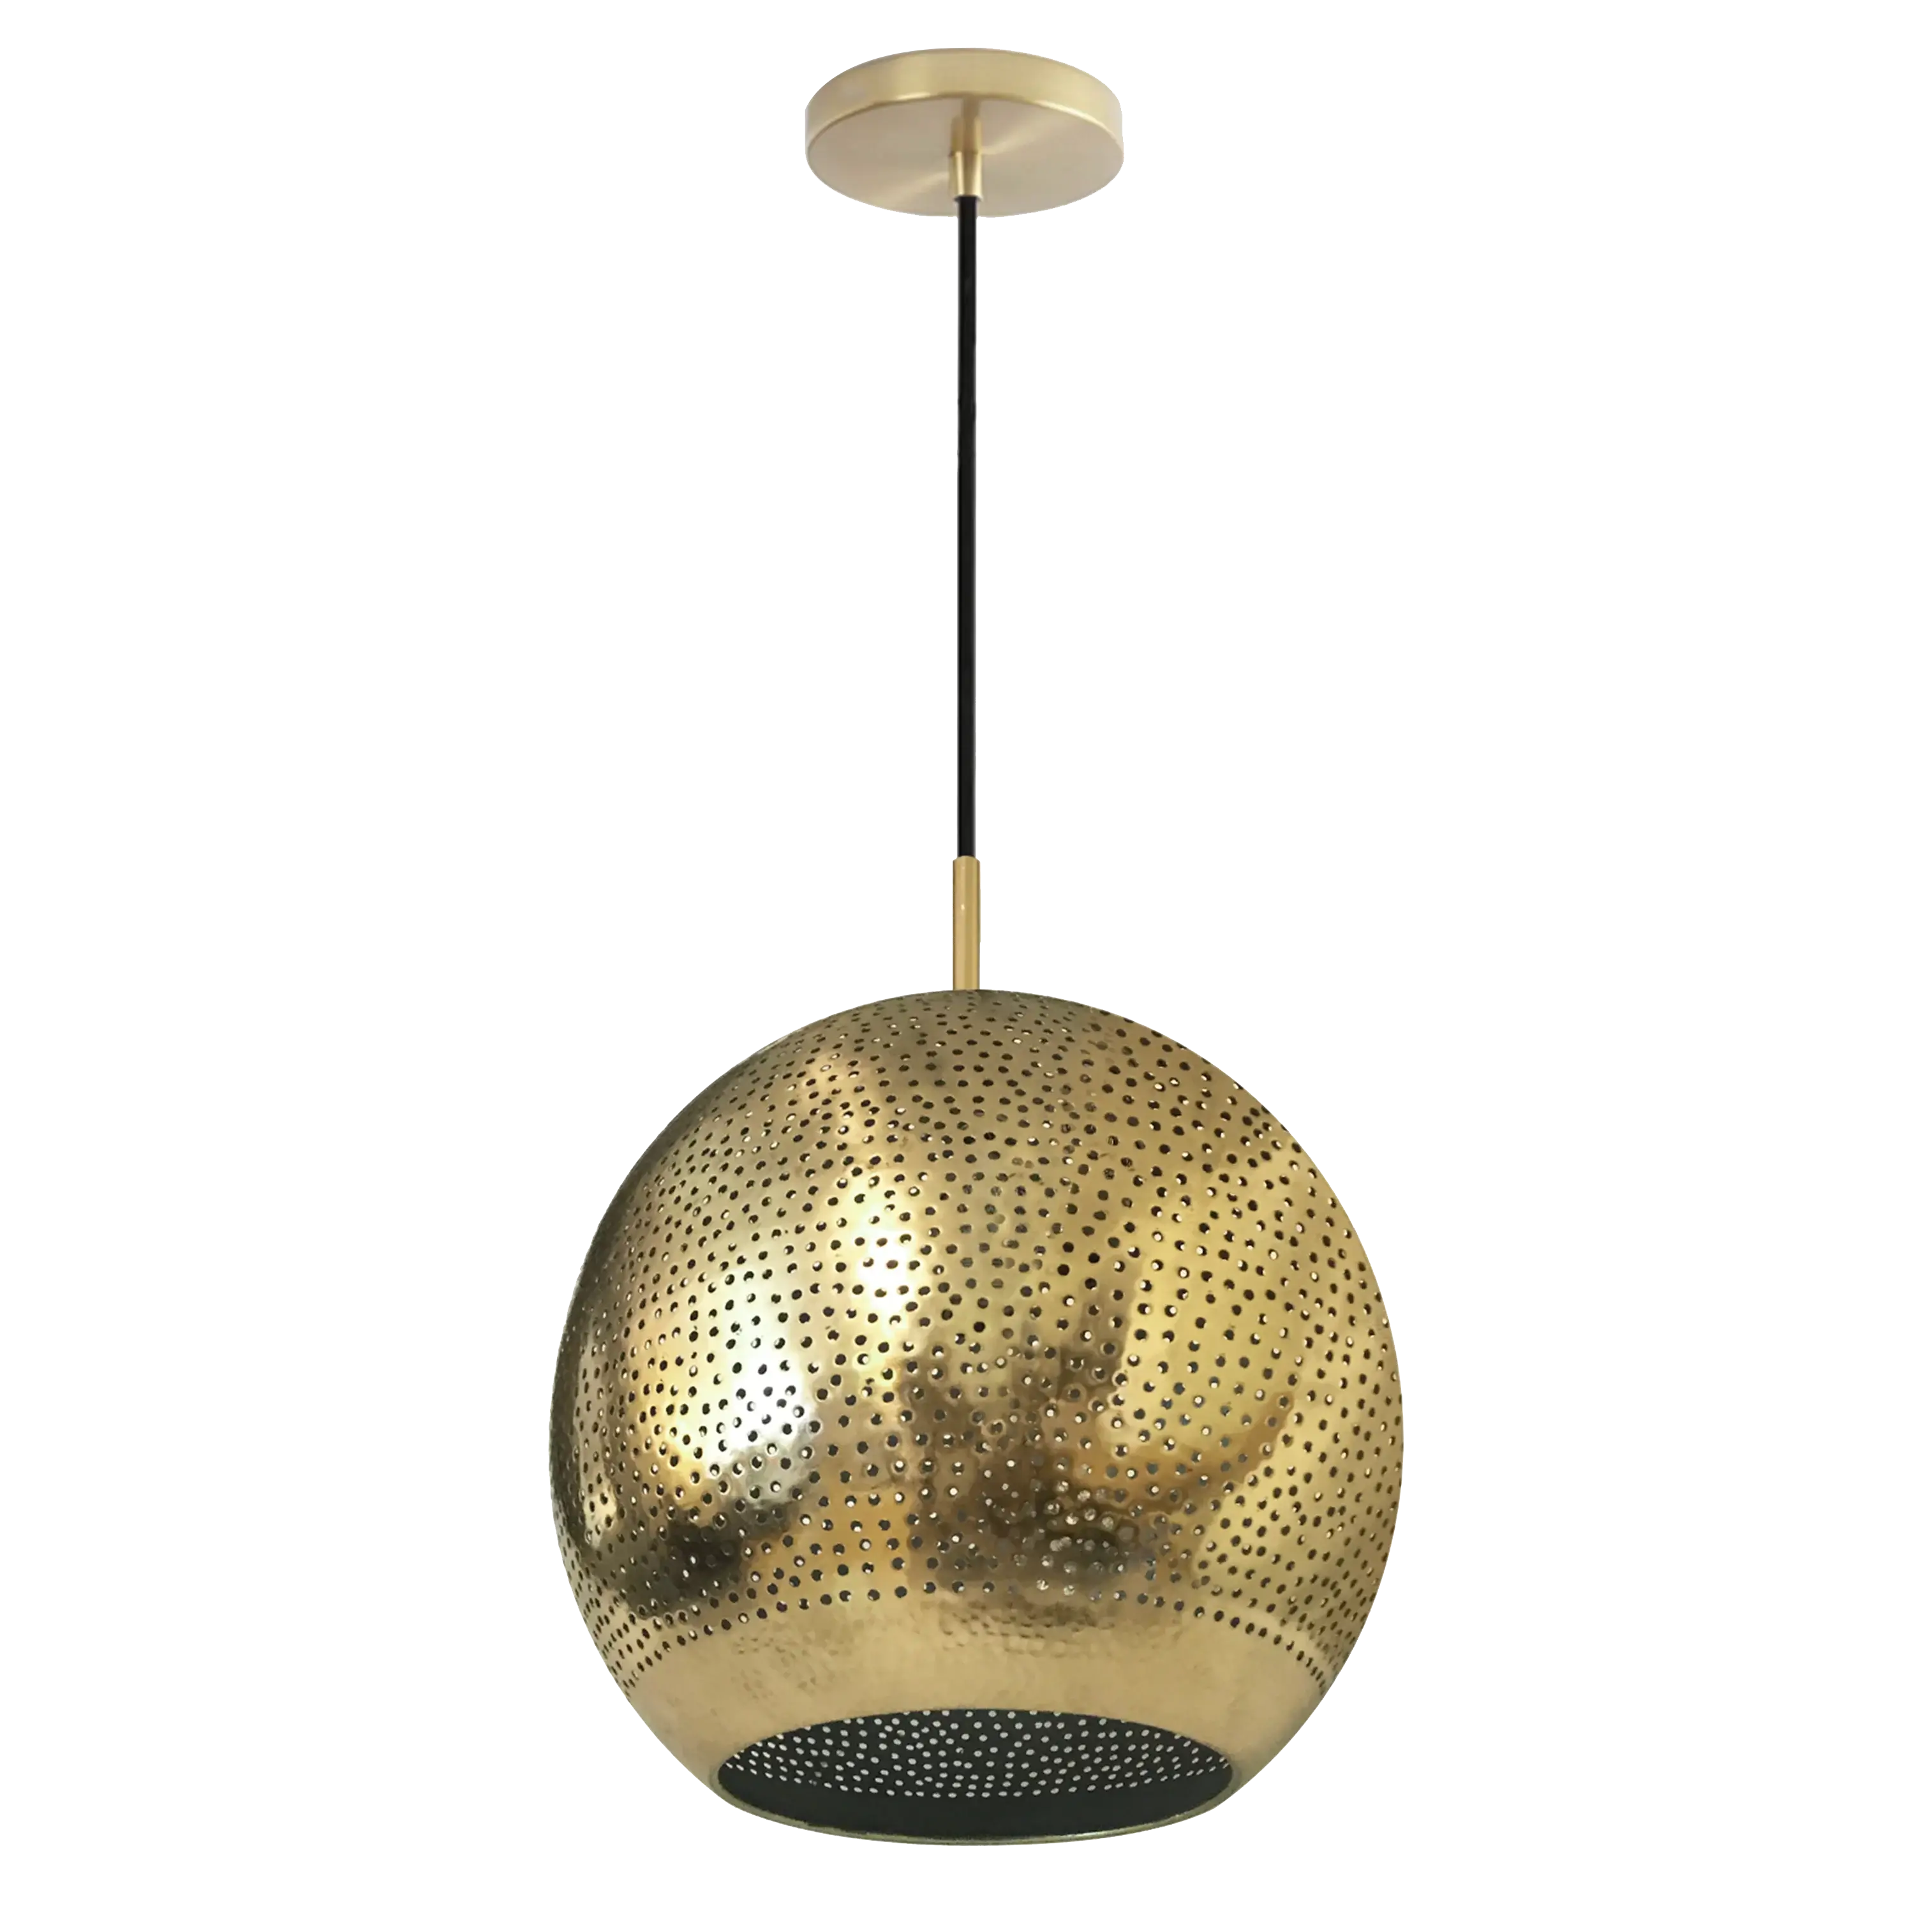 Dounia home Pendant light in Polished brass made of Metal, Model: Shams